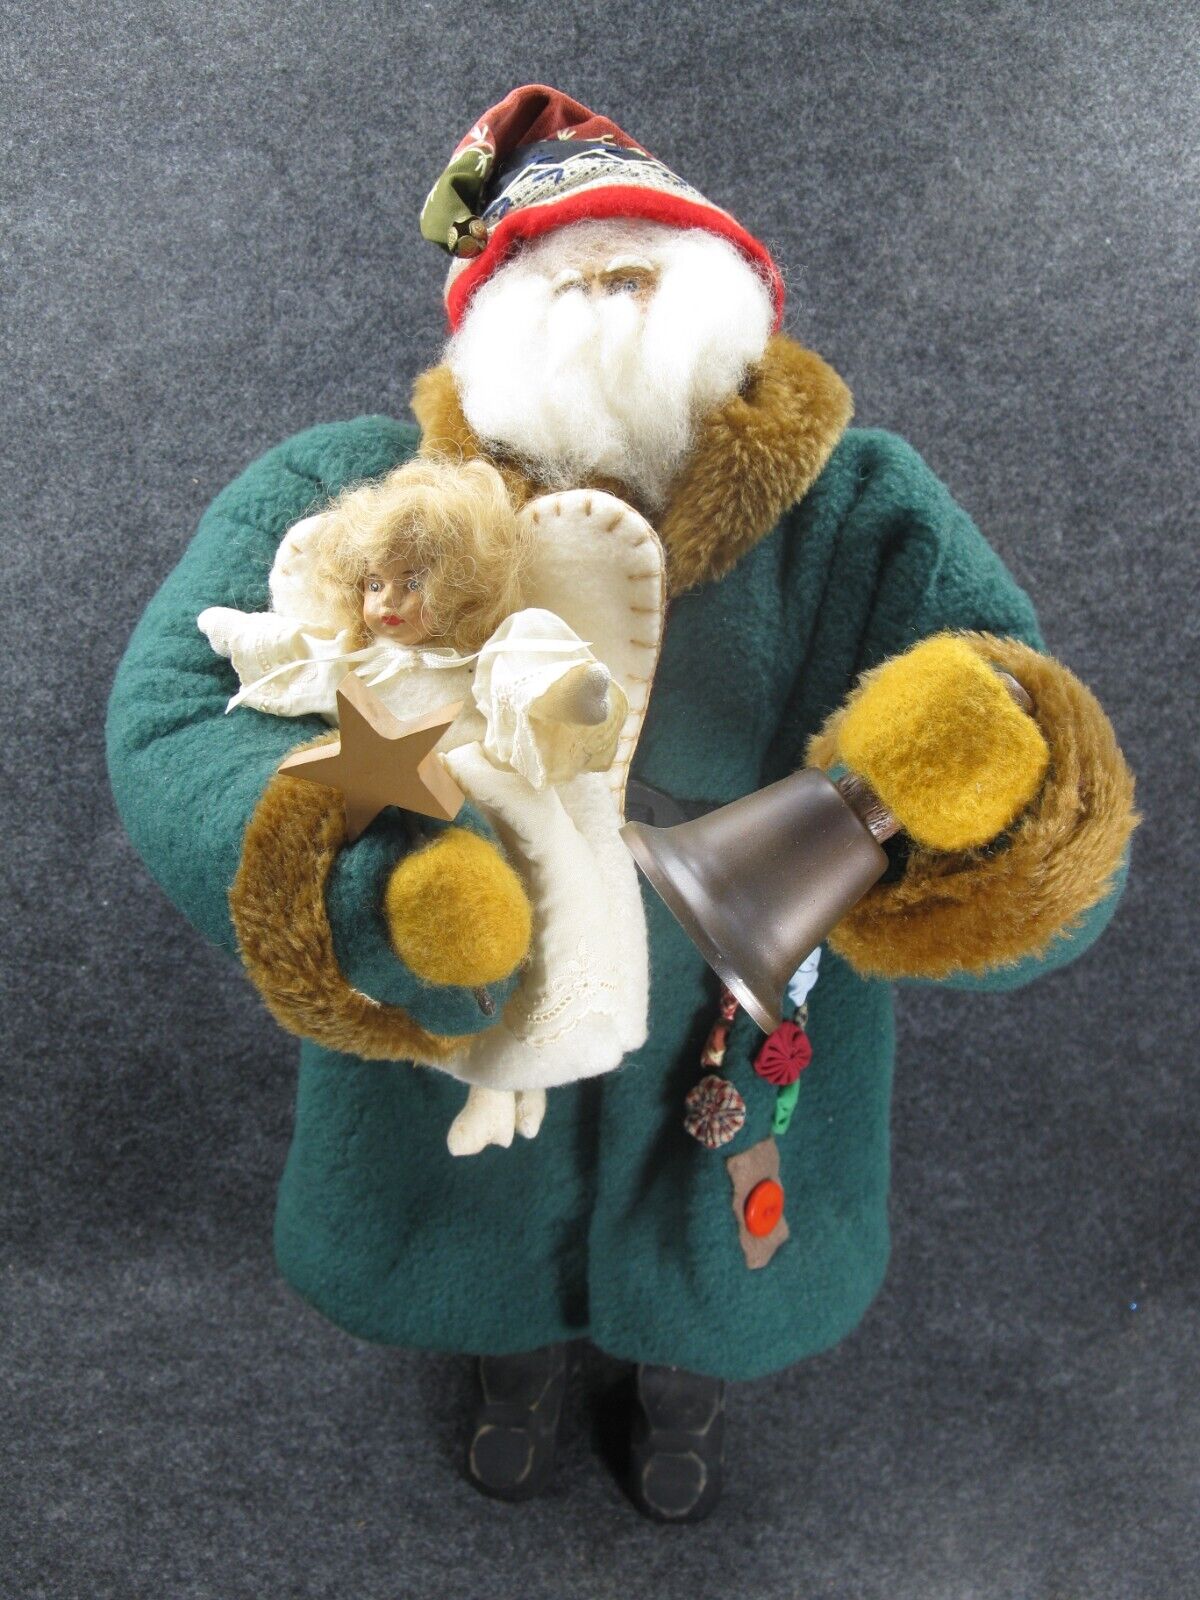 HOUSE OF HATTEN Old World Santa Figure 16.5” Tall with Angel Bell Star